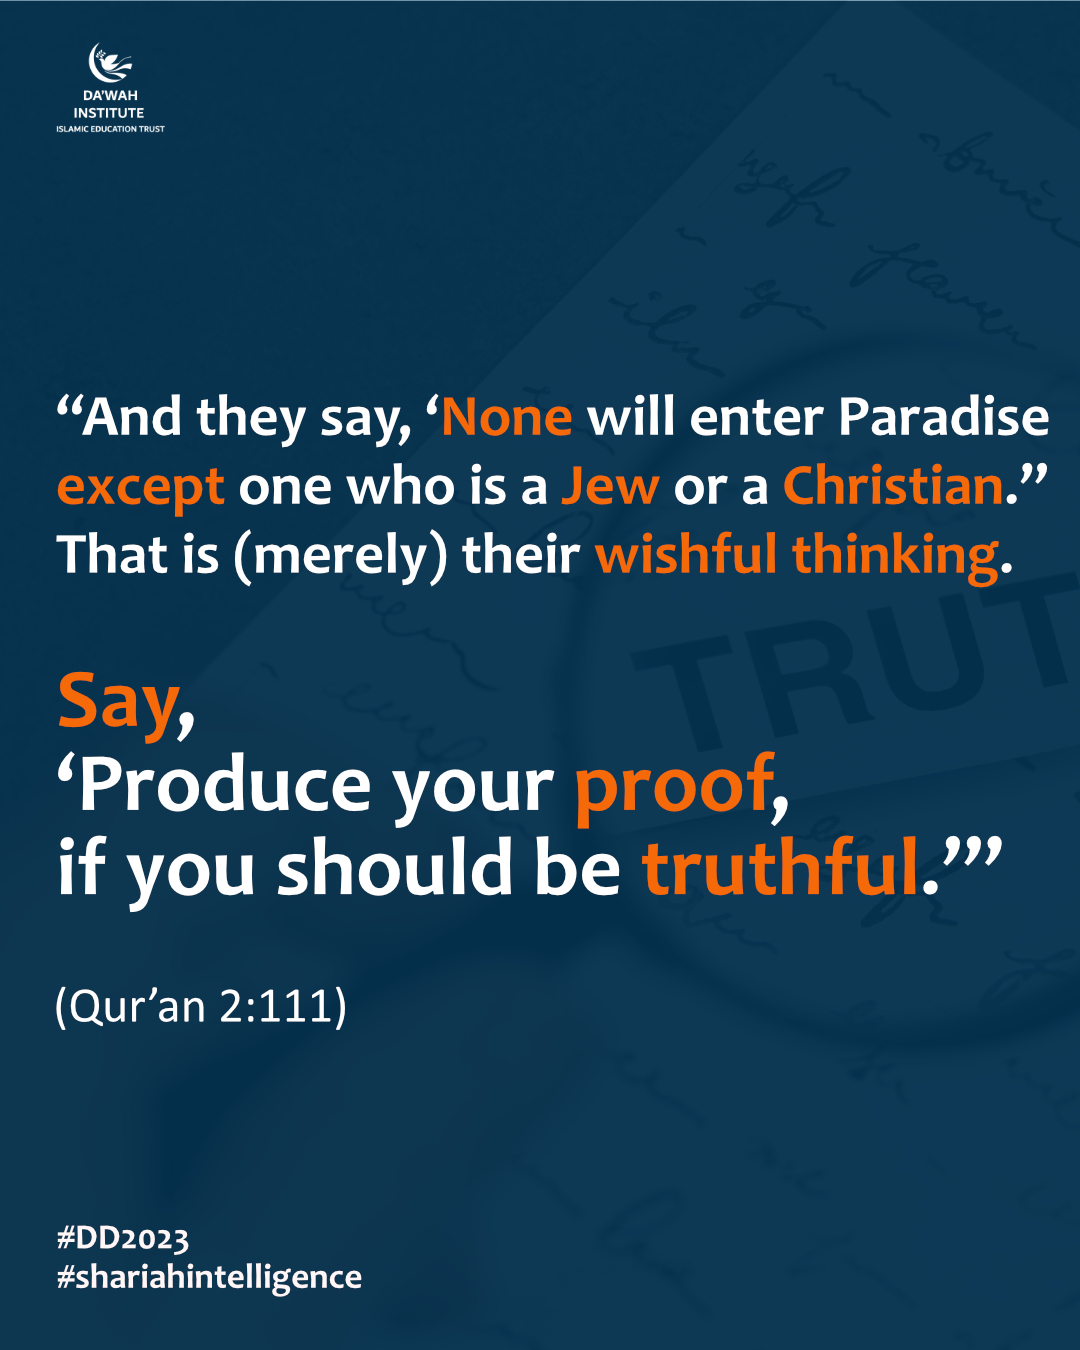 None will enter Paradise except one who is a Jew or a Christian.’